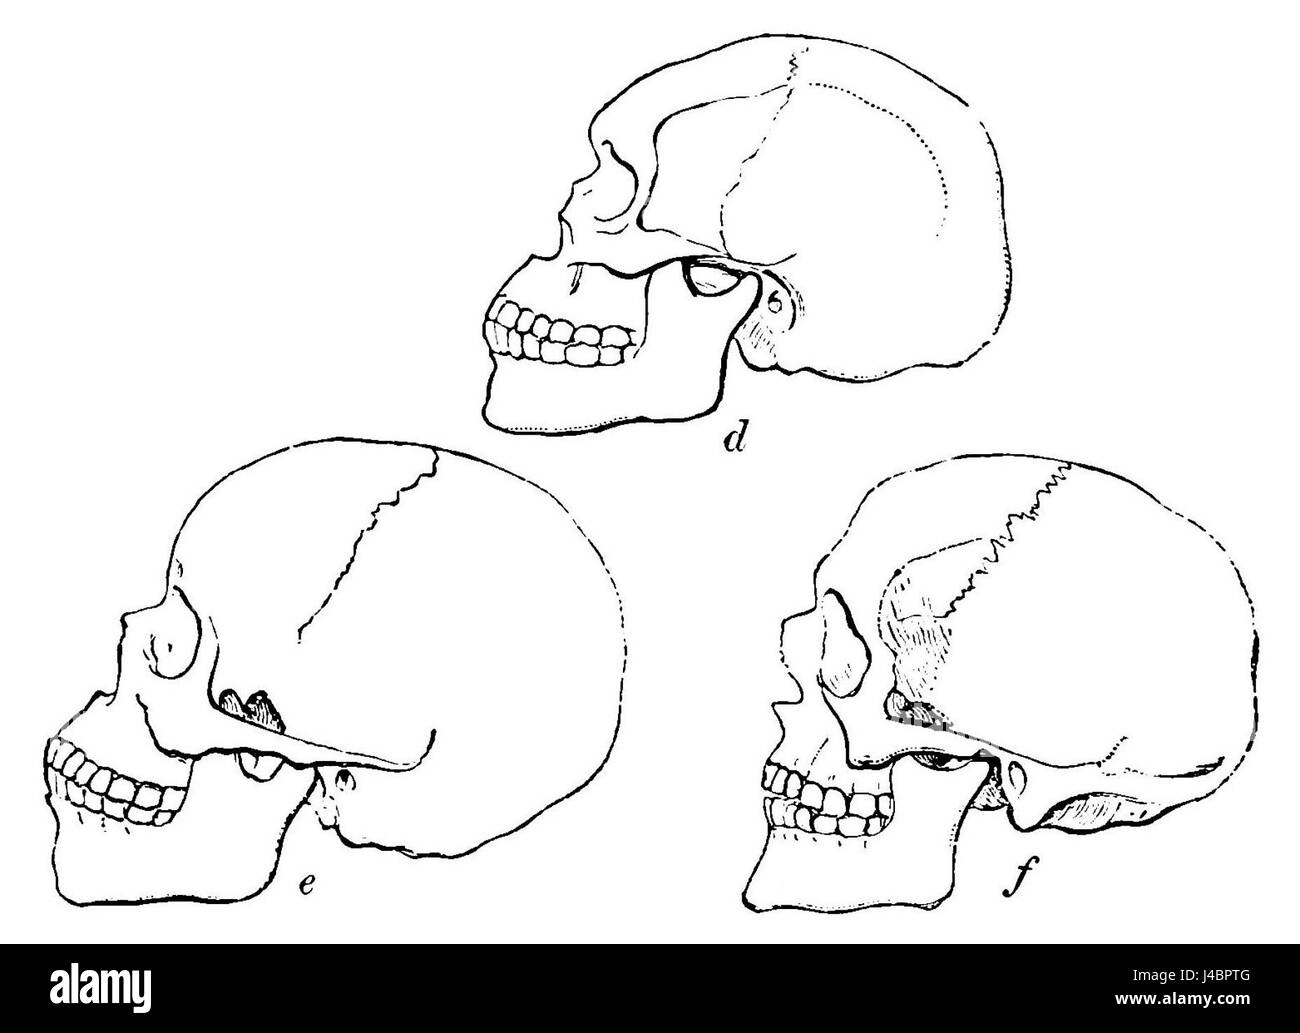 PSM V19 D306 Side view of skulls of various races Stock Photo